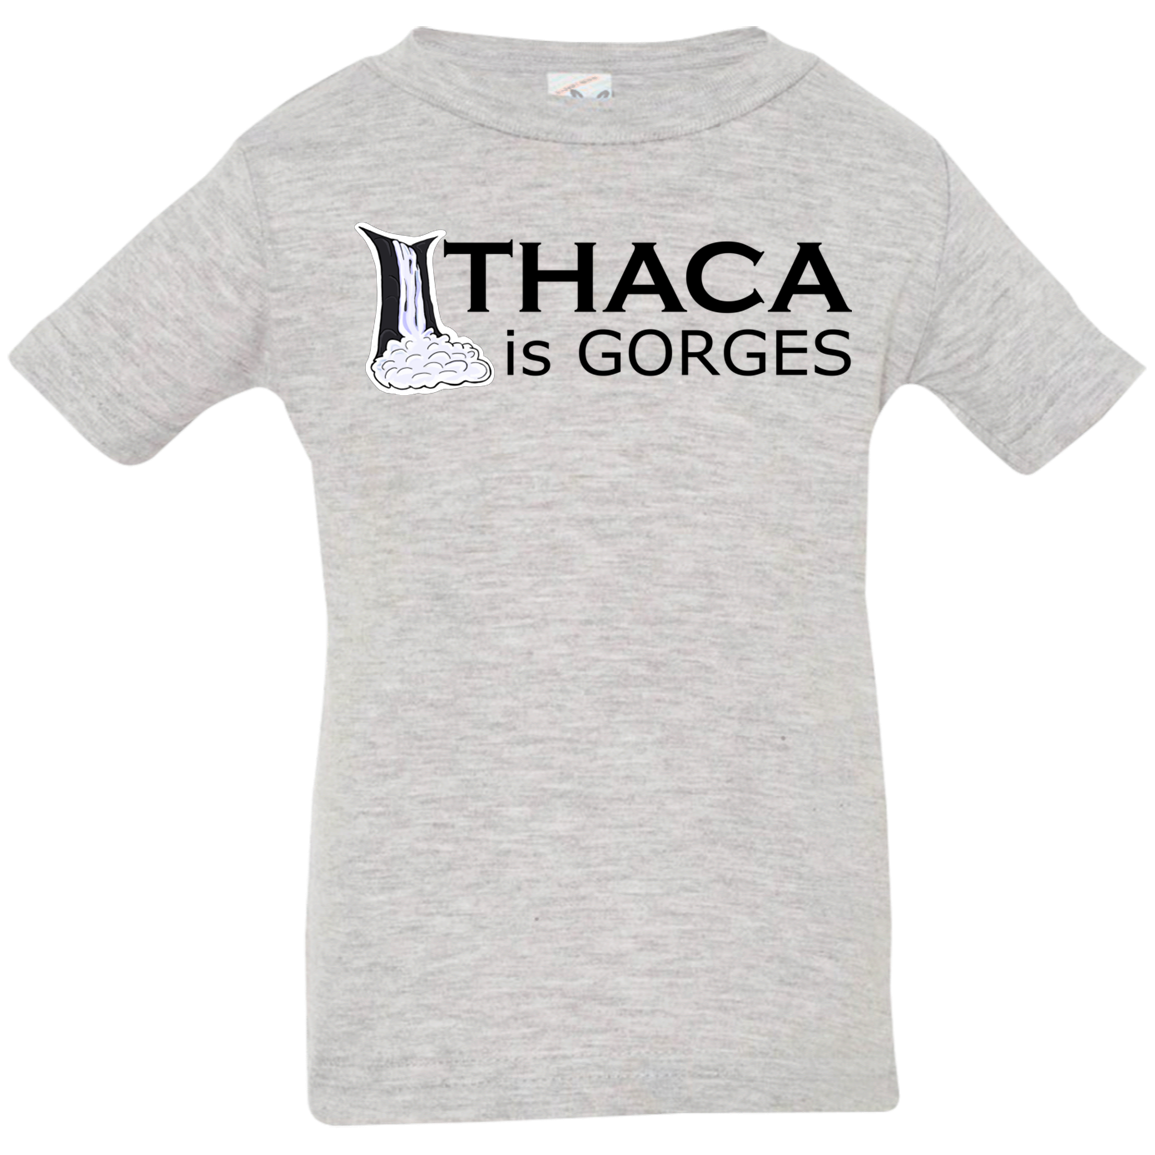 Ithaca is Gorges Infant Jersey T-Shirt (Color Graphic)